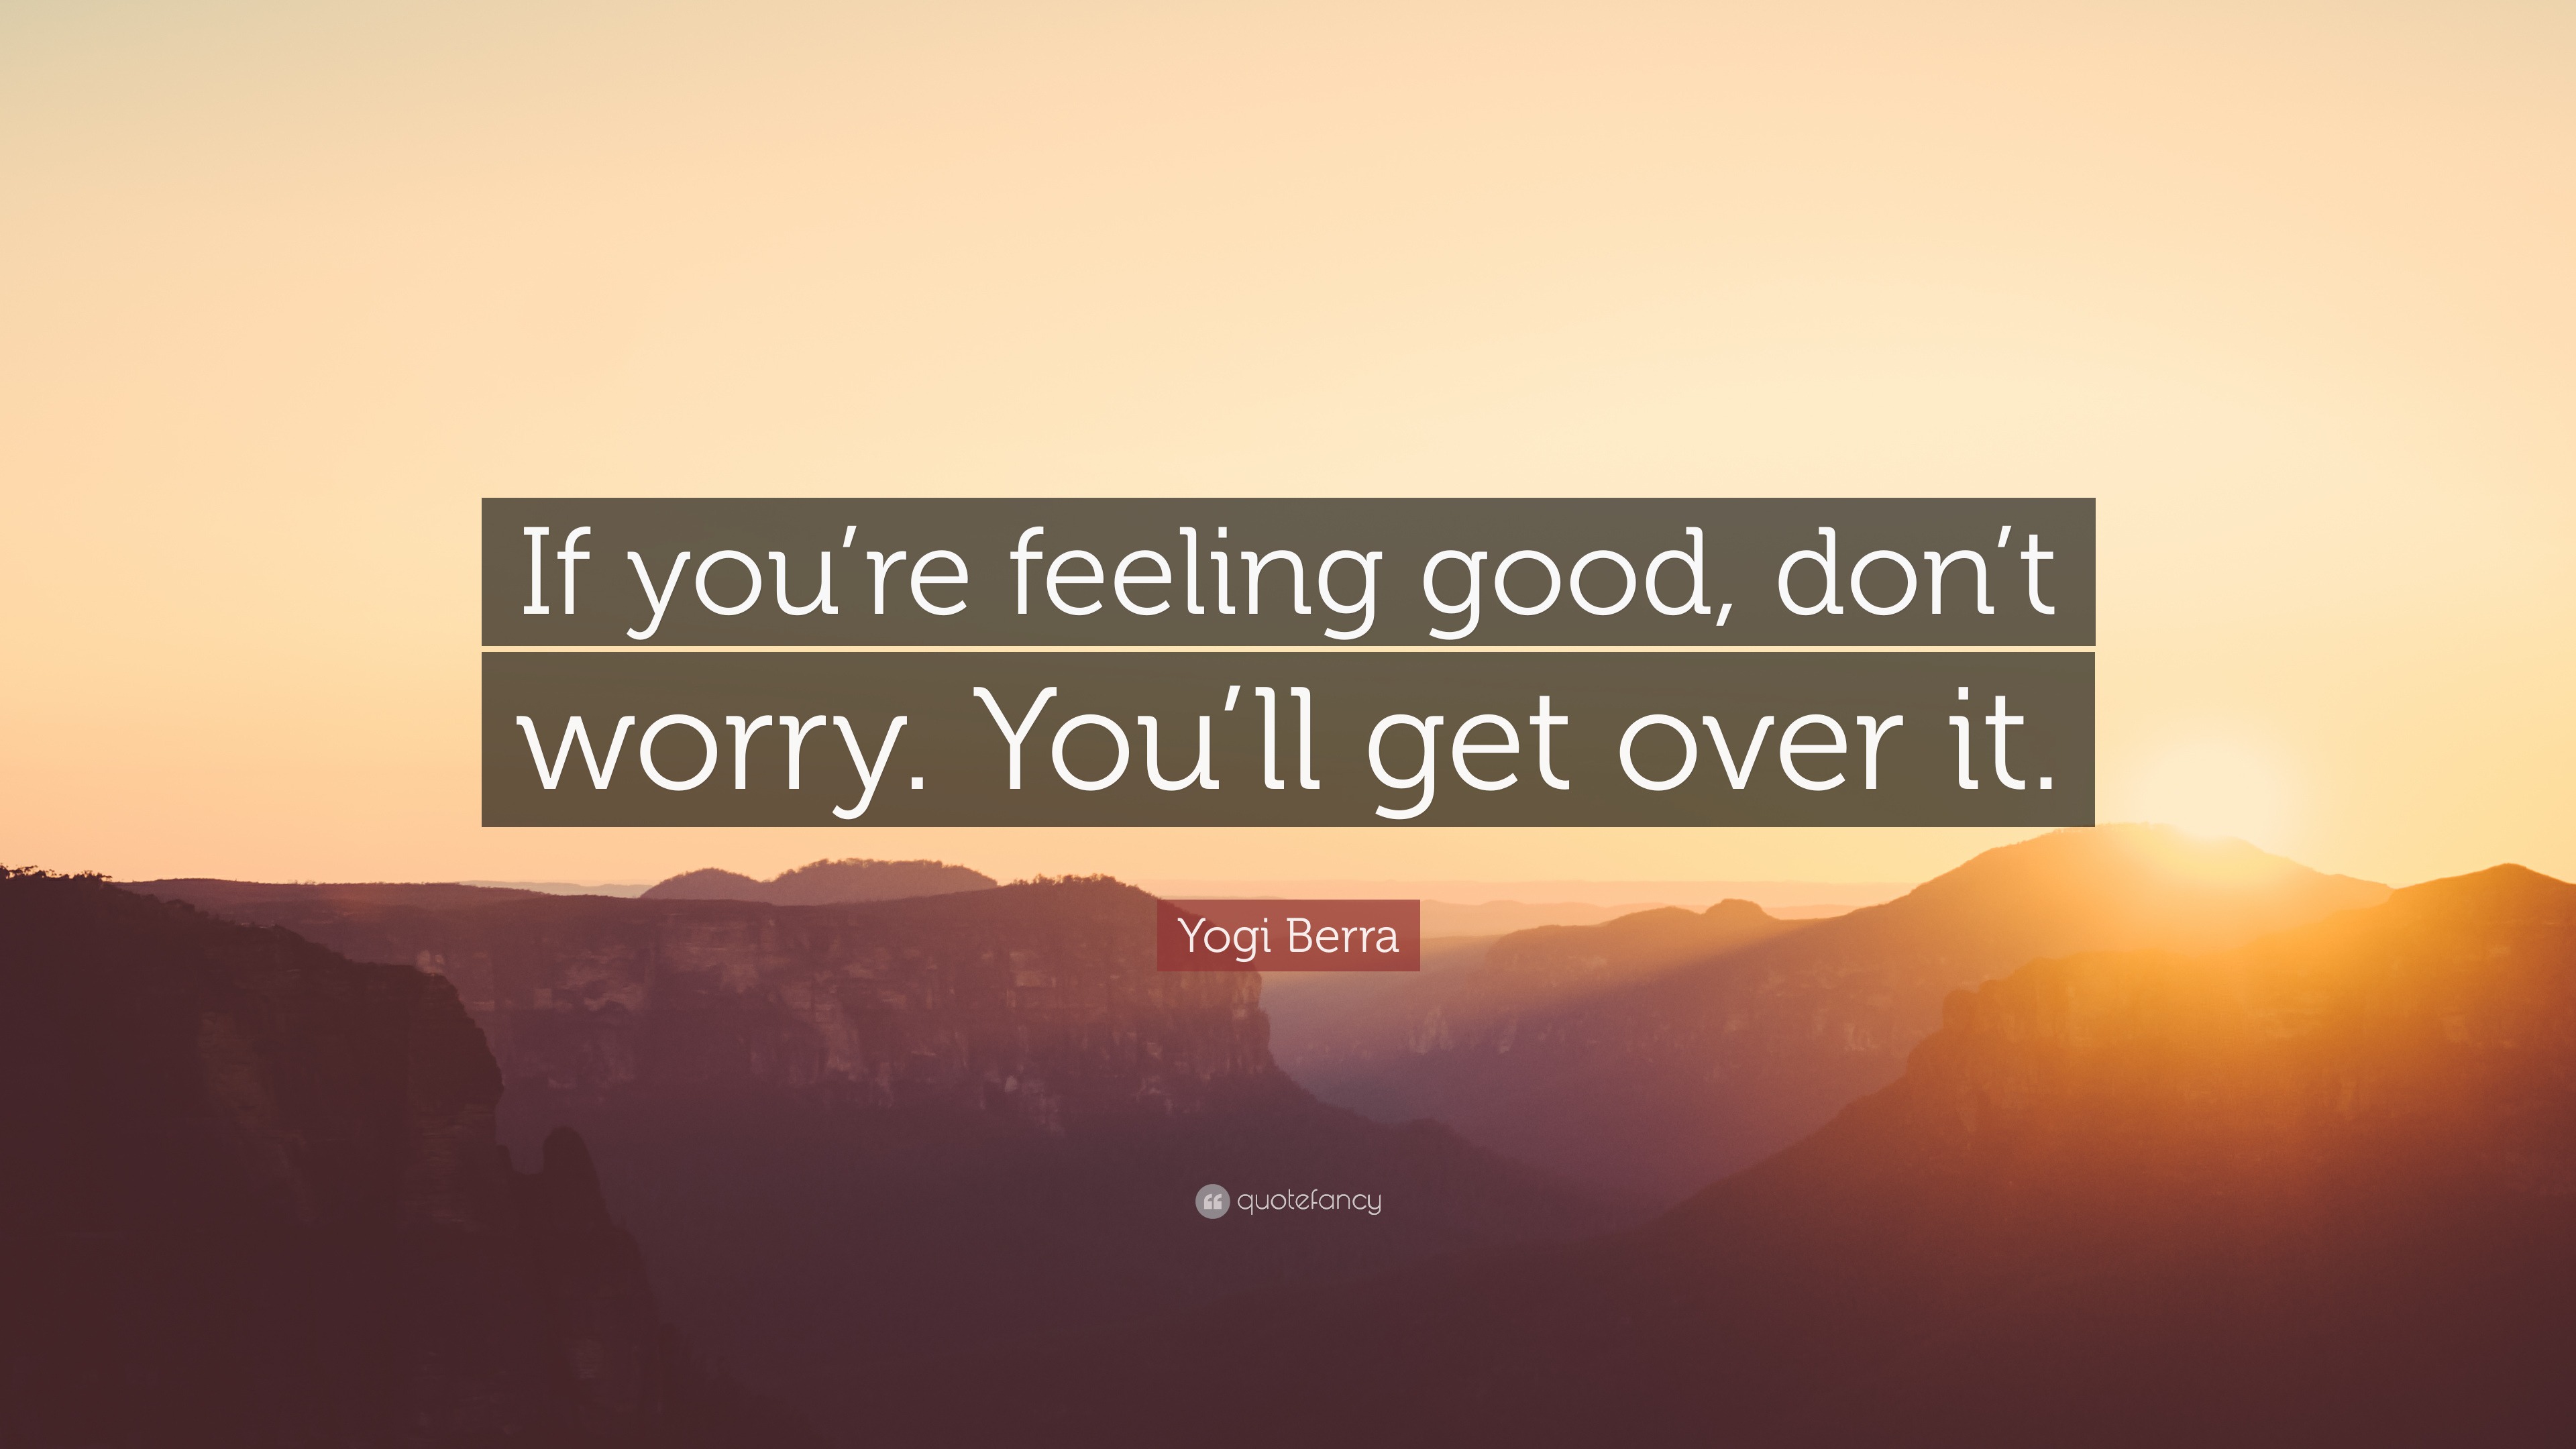 Yogi Berra Quote: “If you're feeling good, don't worry. You'll get